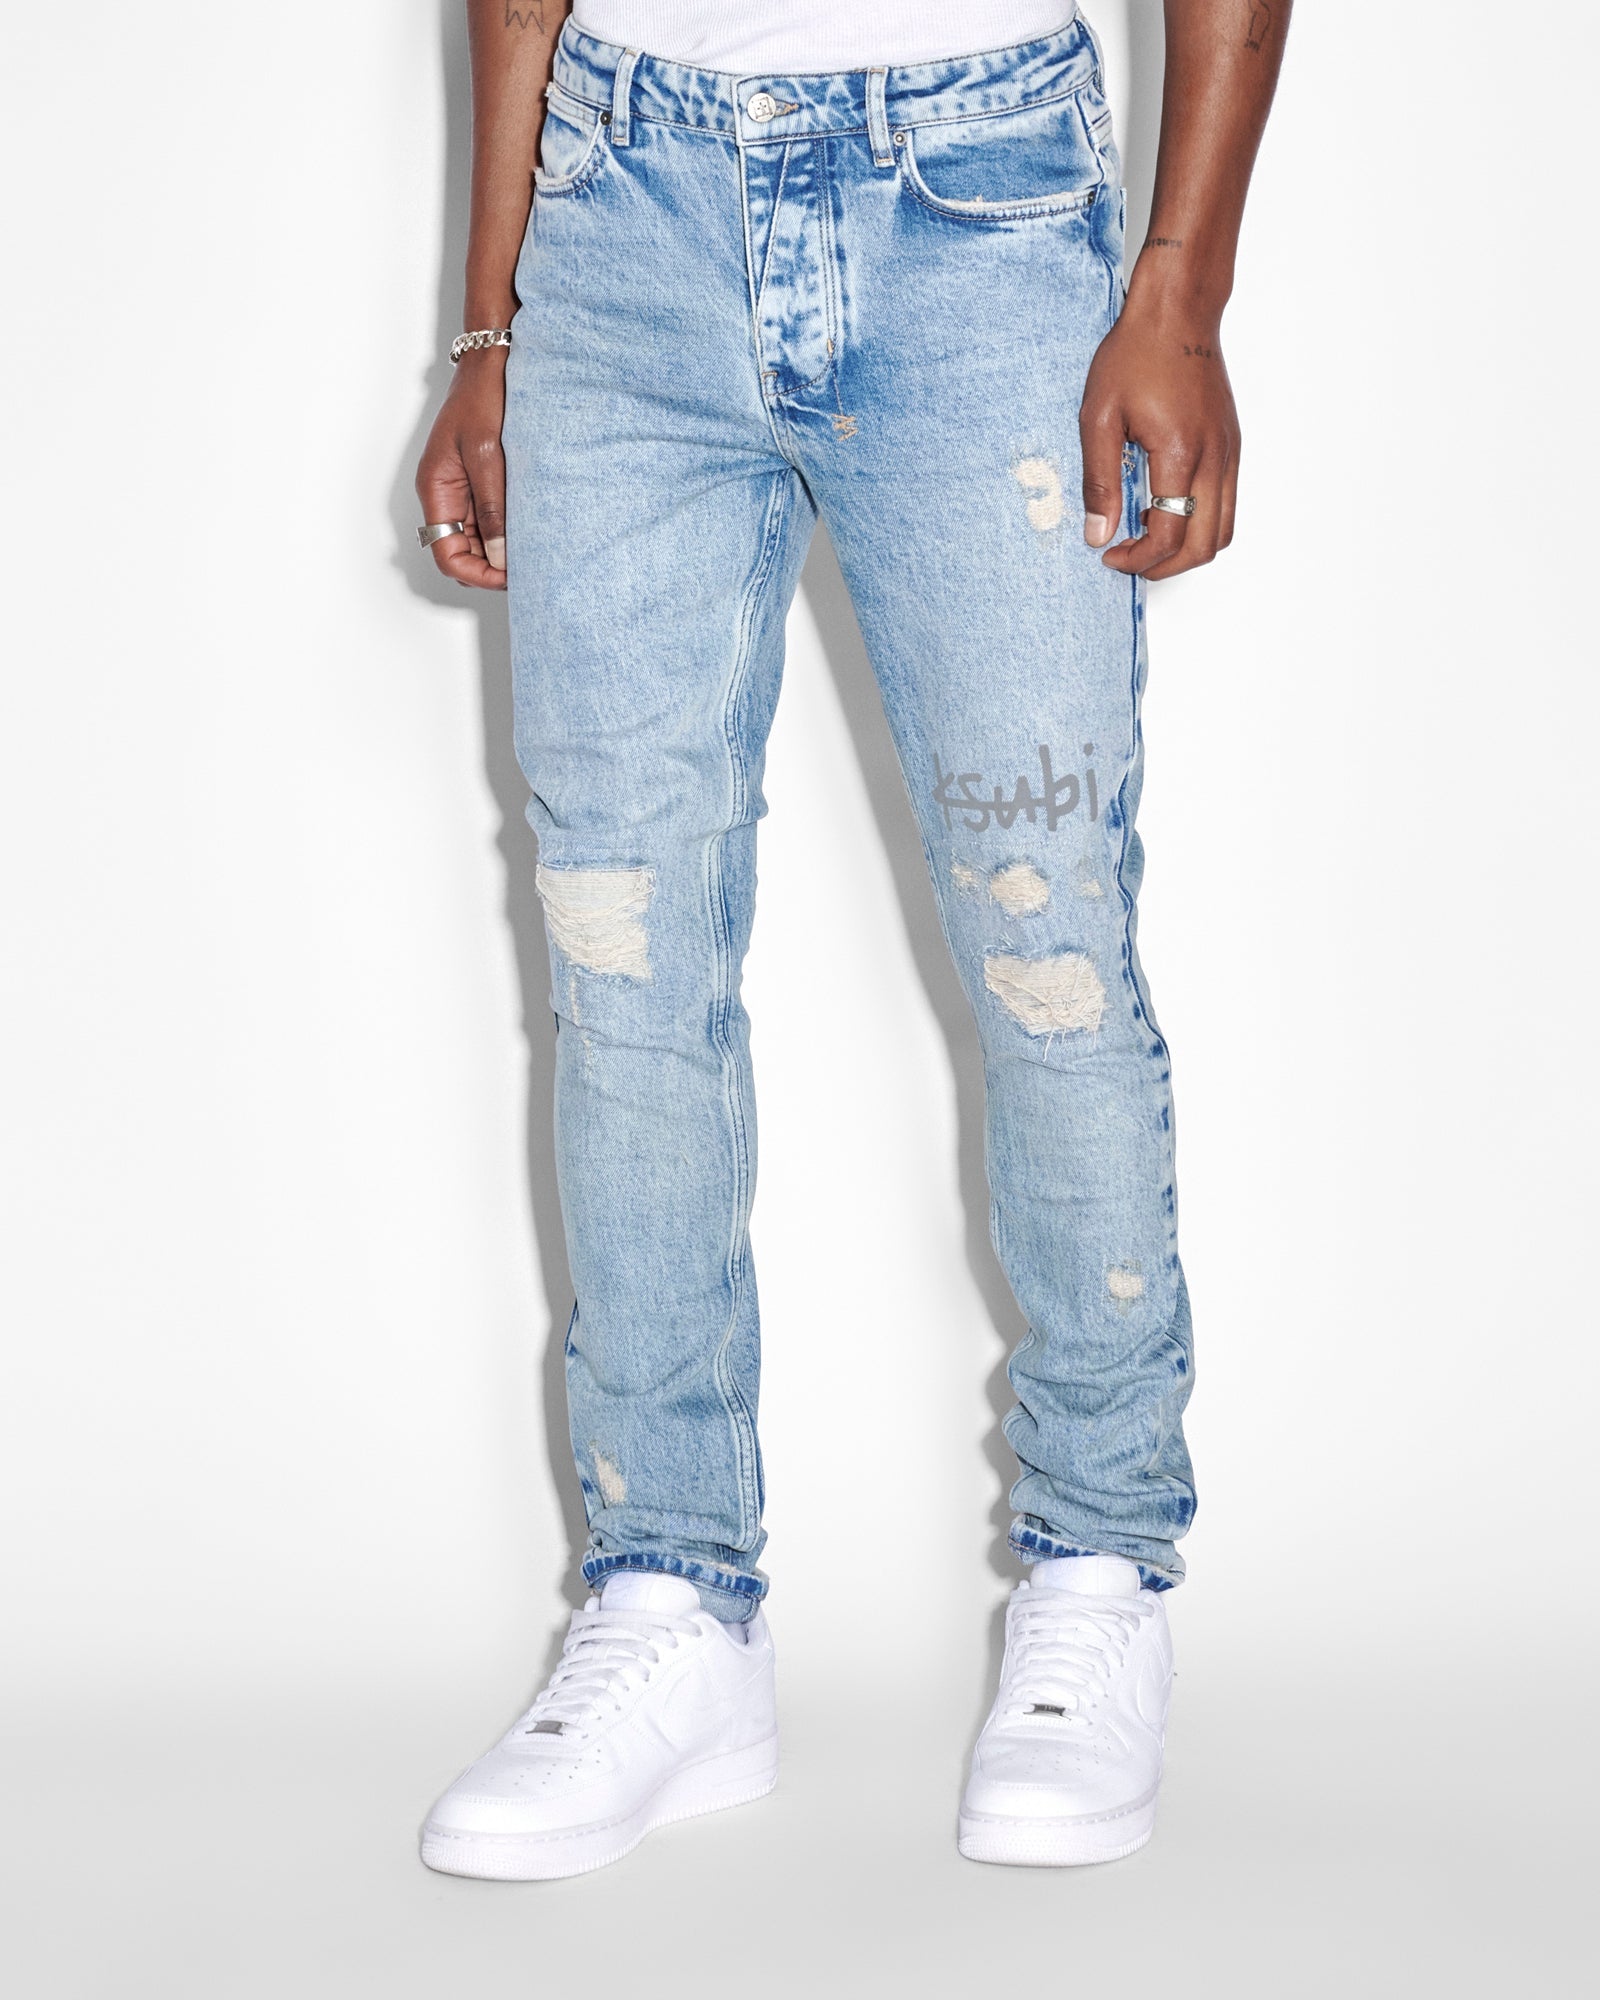 Buy Just No Logo Men's Light Blue Ripped Destroyed Slim Fit Denim Jeans(32)  at Amazon.in